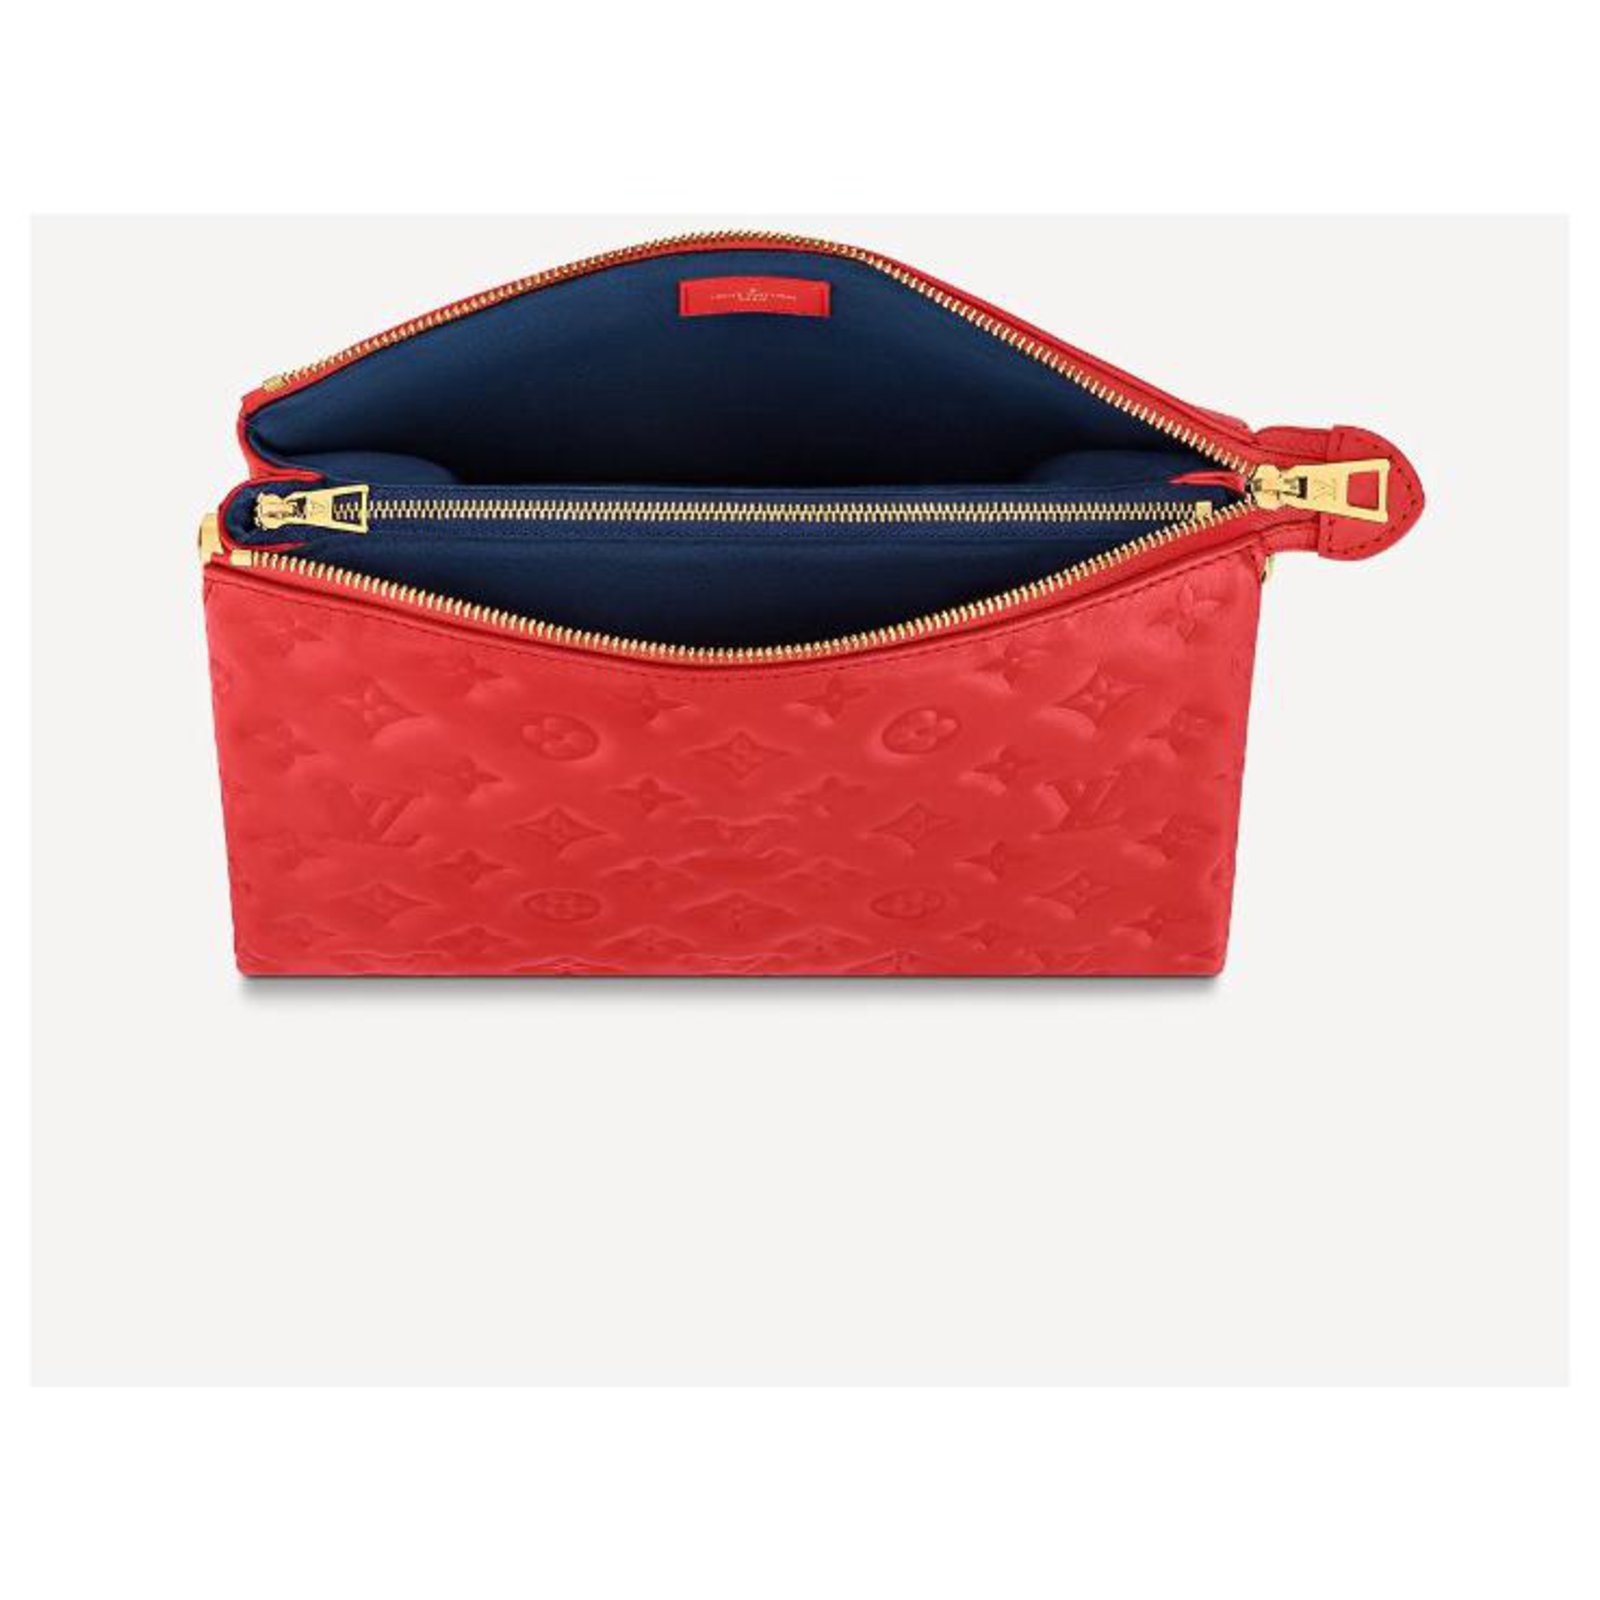 Louis Vuitton, Bags, Authentic Louis Vuitton Coussin Pm In Rouge Red Nwt